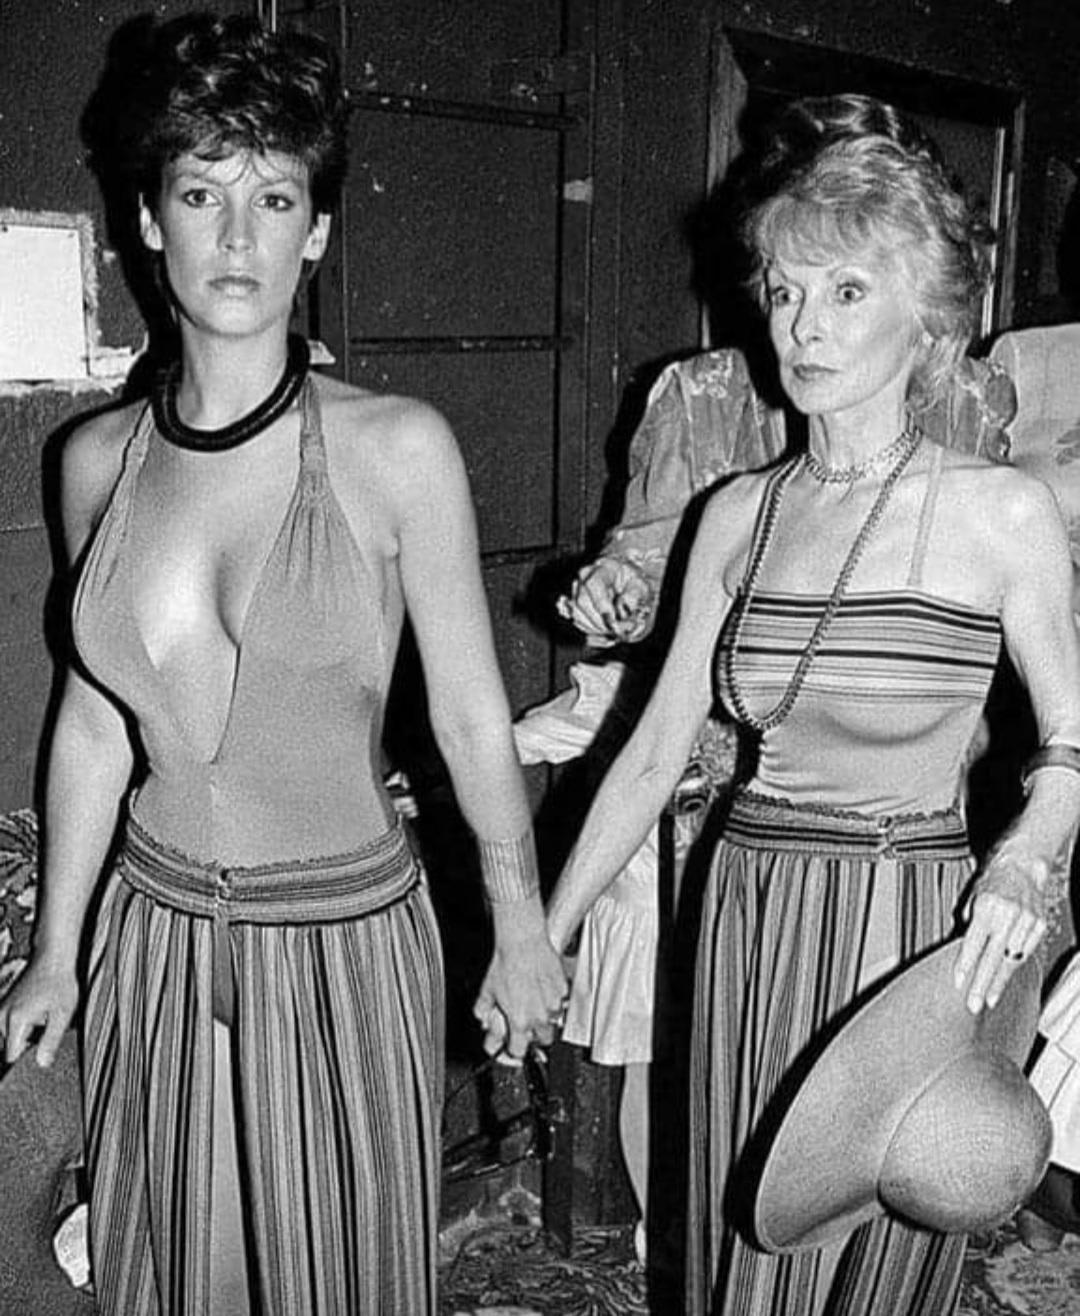 Jamie Lee Curtis & mother Janet Leigh at Studio 54. Late 1970s